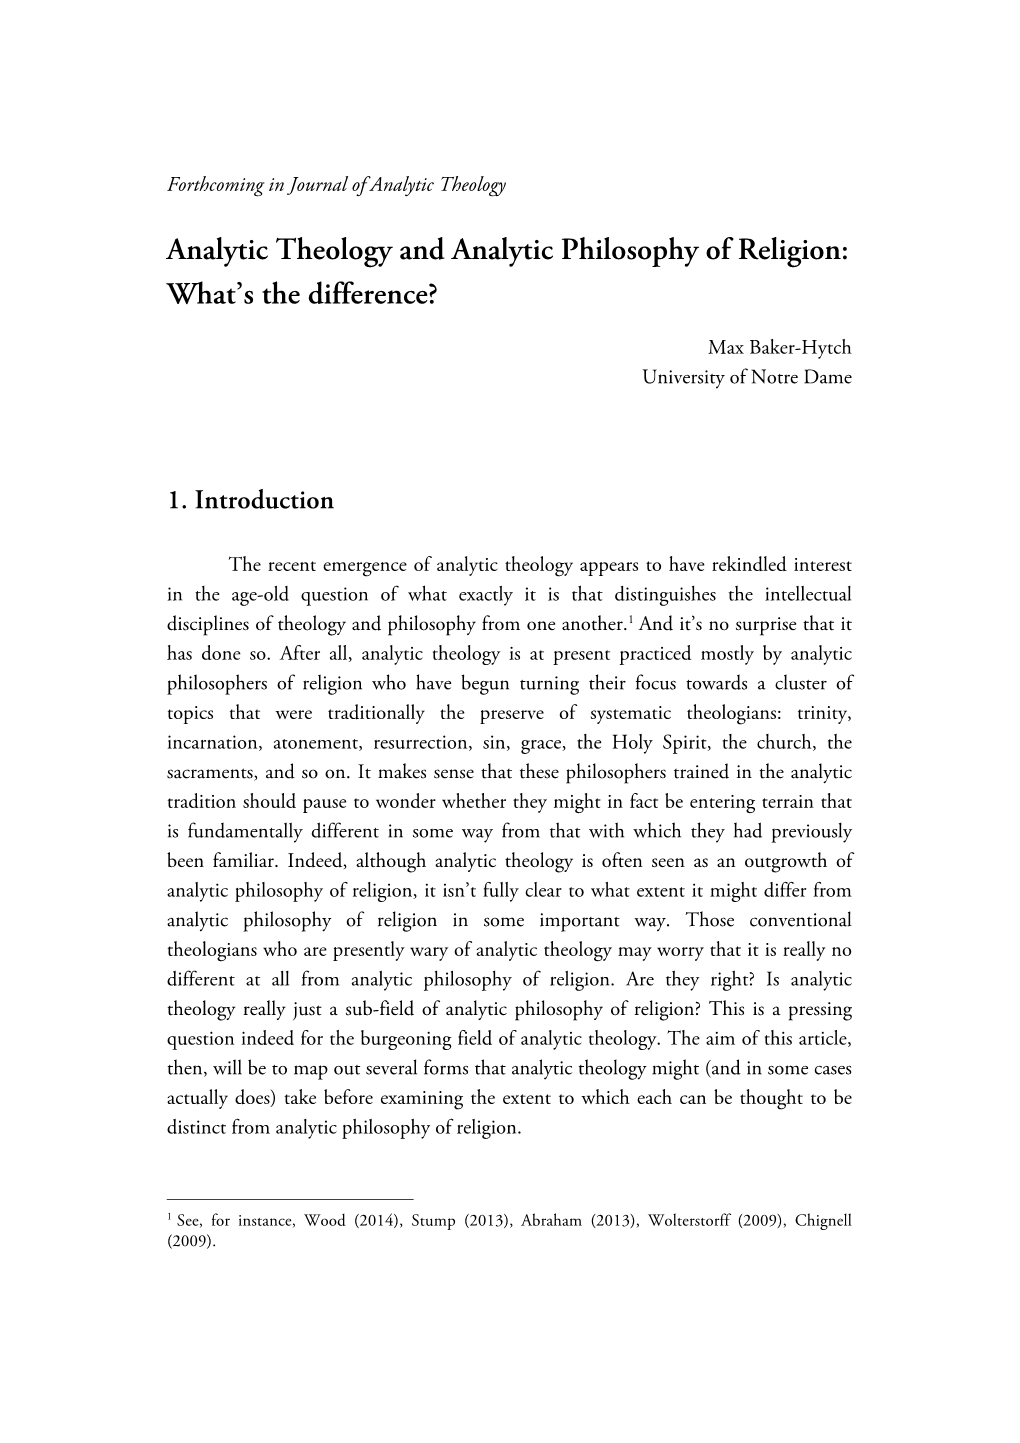 Analytic Theology and Analytic Philosophy of Religion: What’S the Difference?